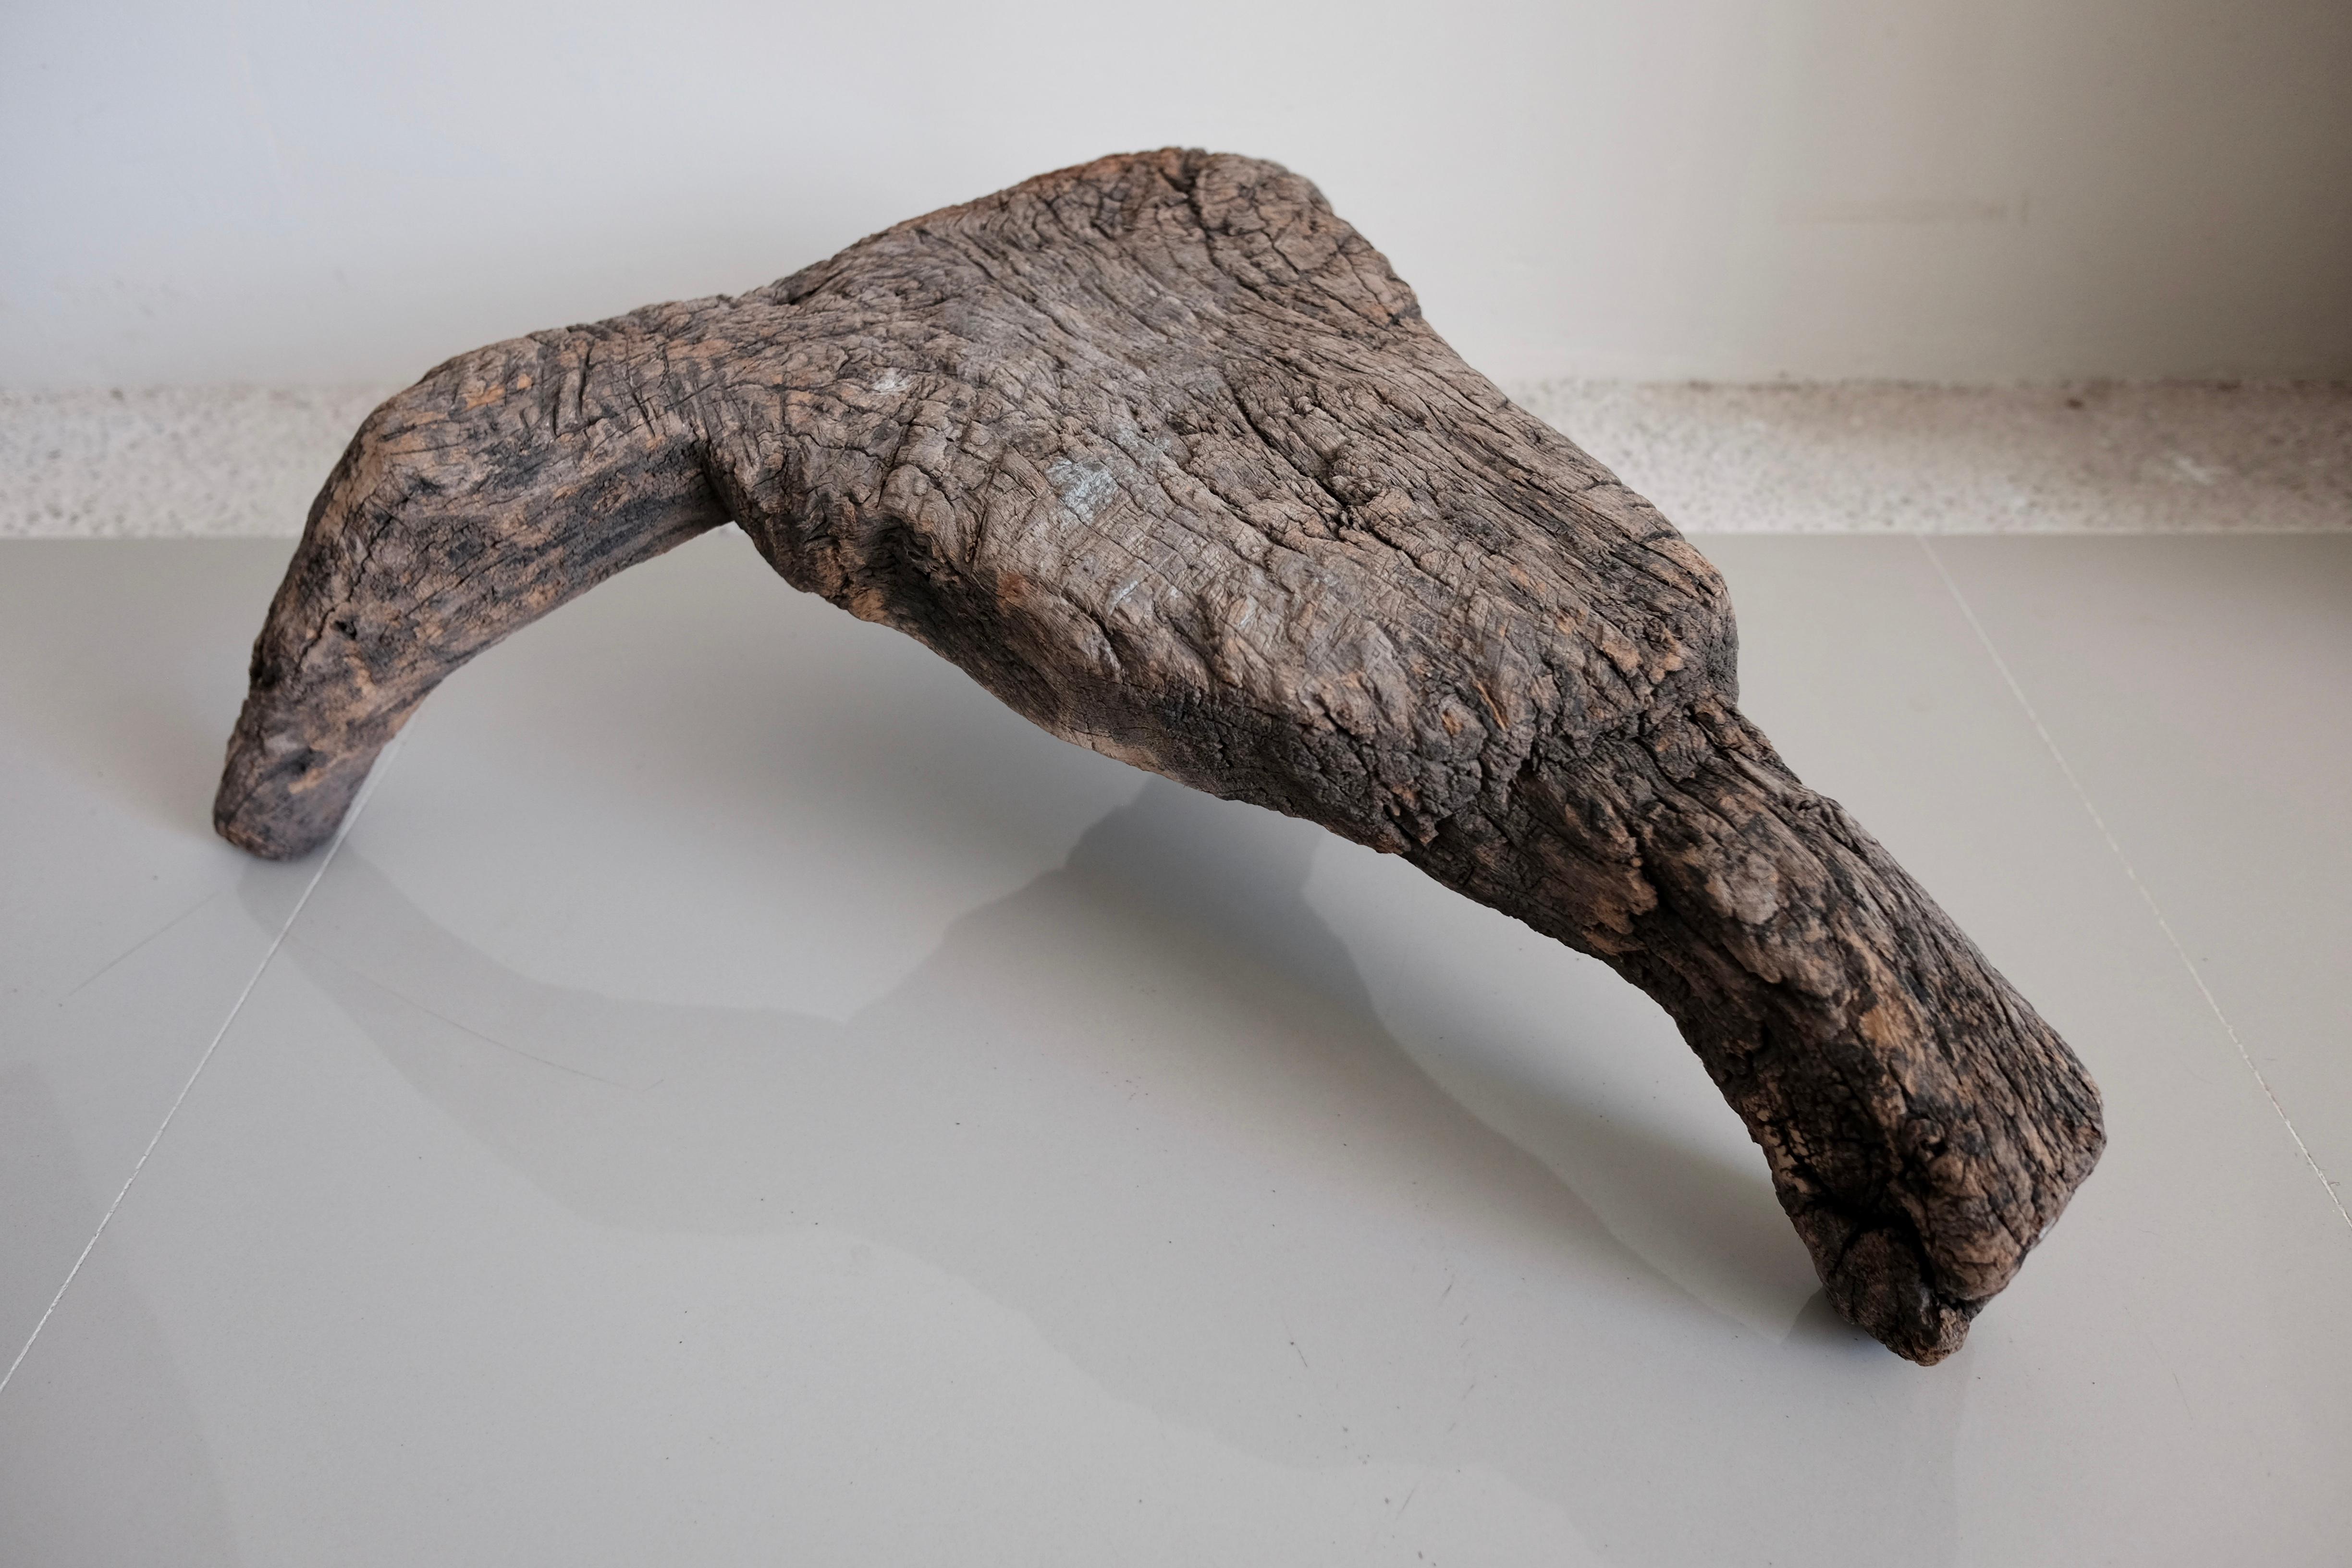 Primitive low platform mesquite stool from the Sierra Gorda of Guanajuato, Mexico. Surface shows significant wear and age.